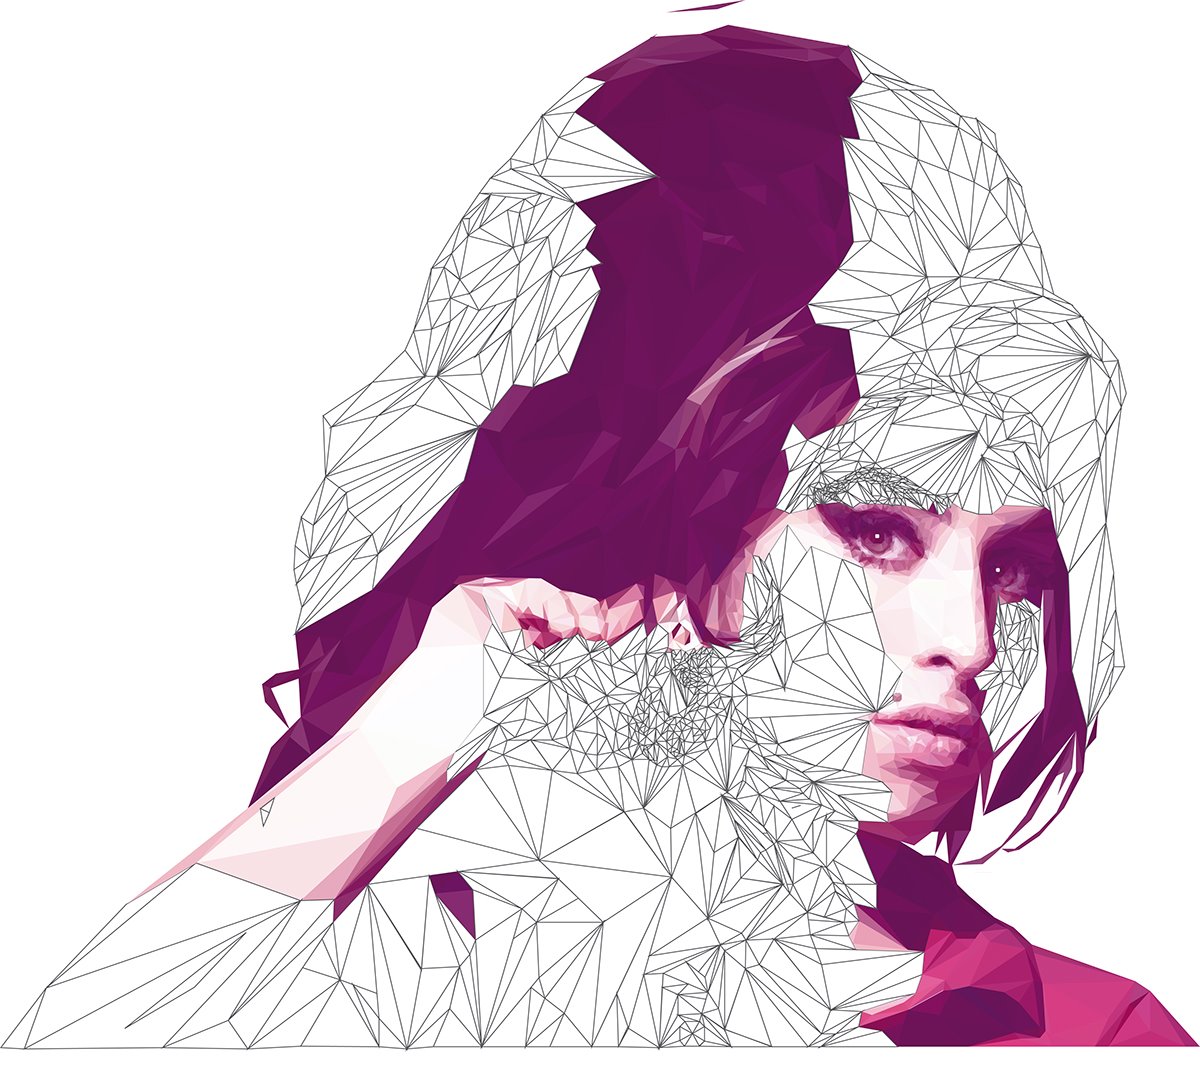 Amy Winehouse - Low Poly High Poly Portrait